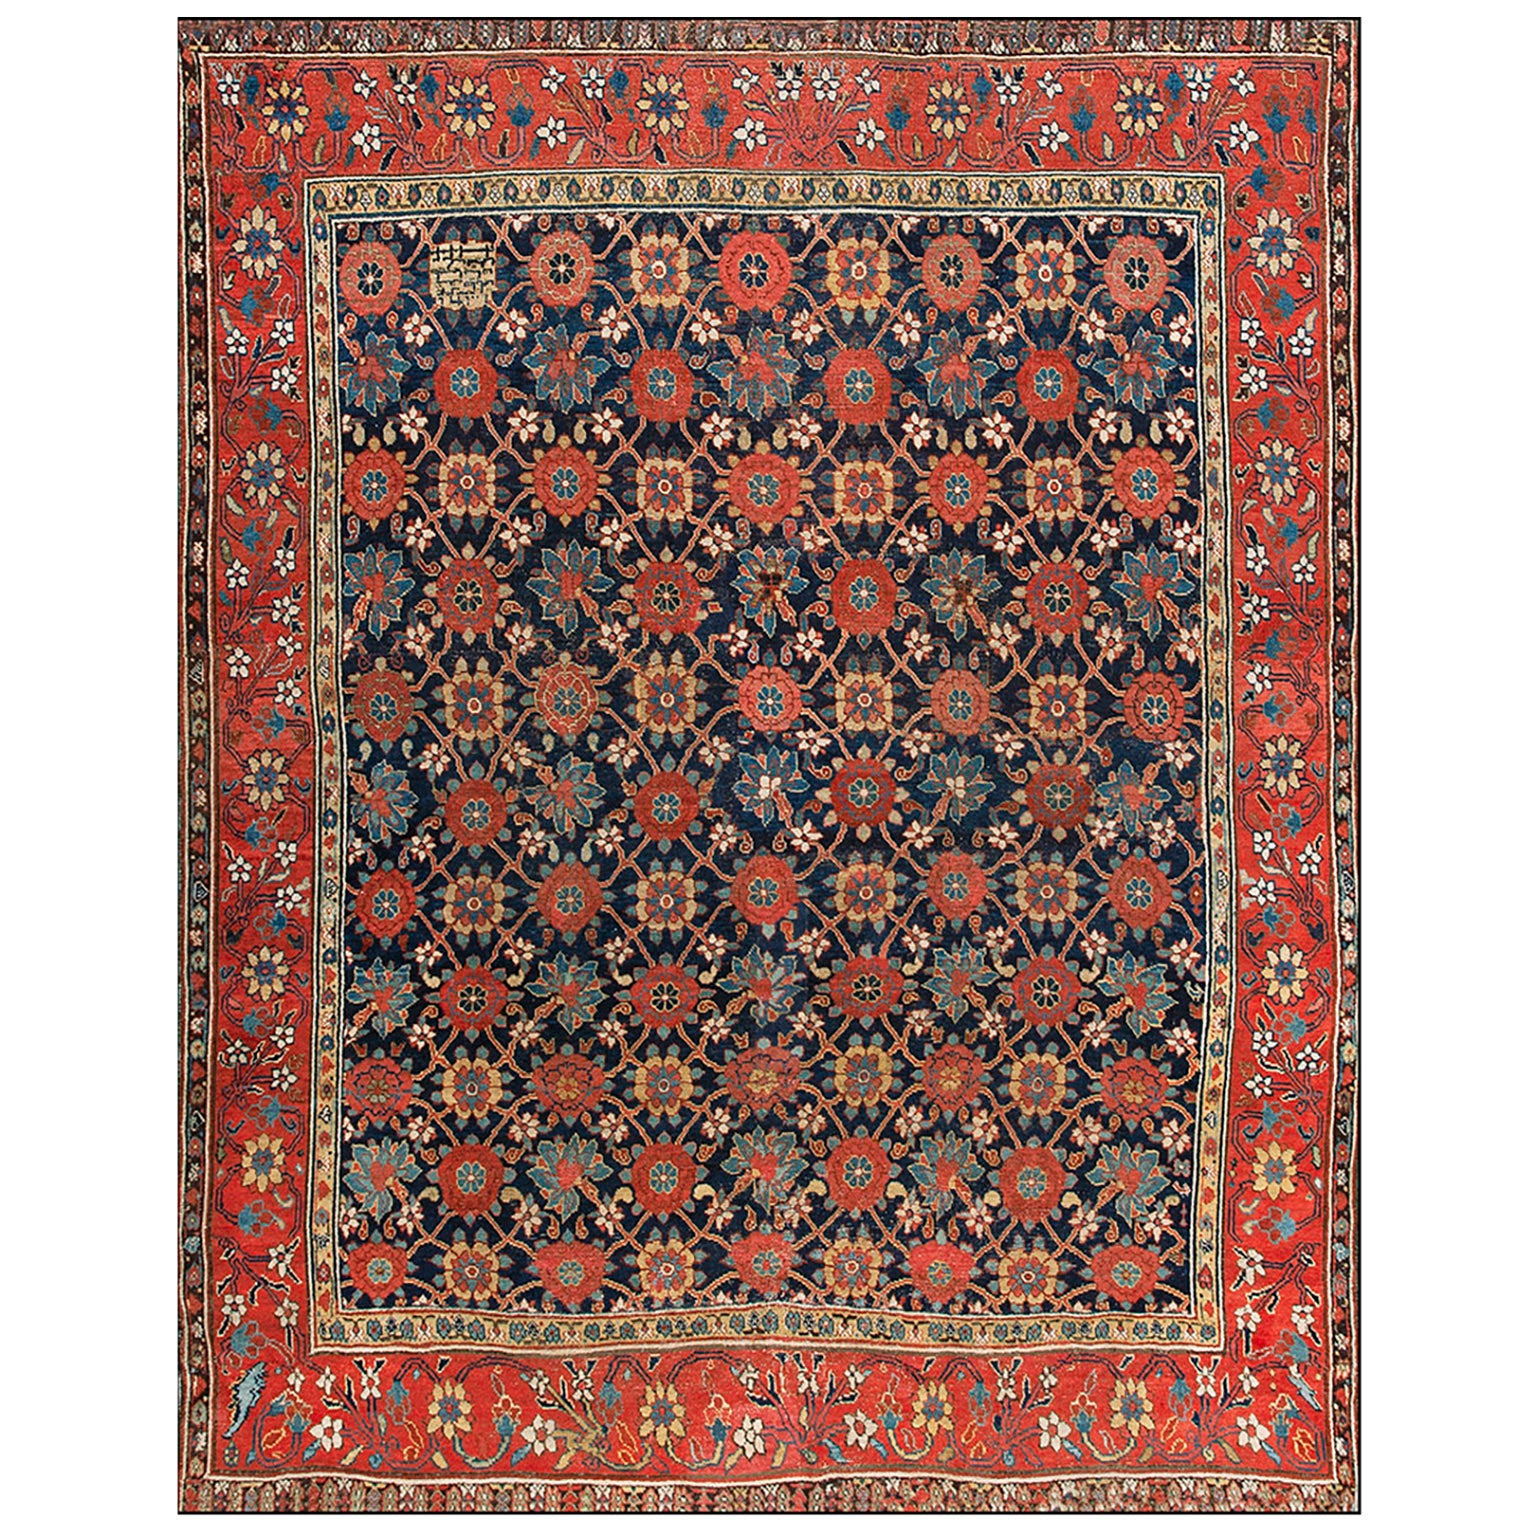 Early 19th Century NW. Persian Carpet with Inscription Dated 1808 8' 4" x 10' 4" For Sale